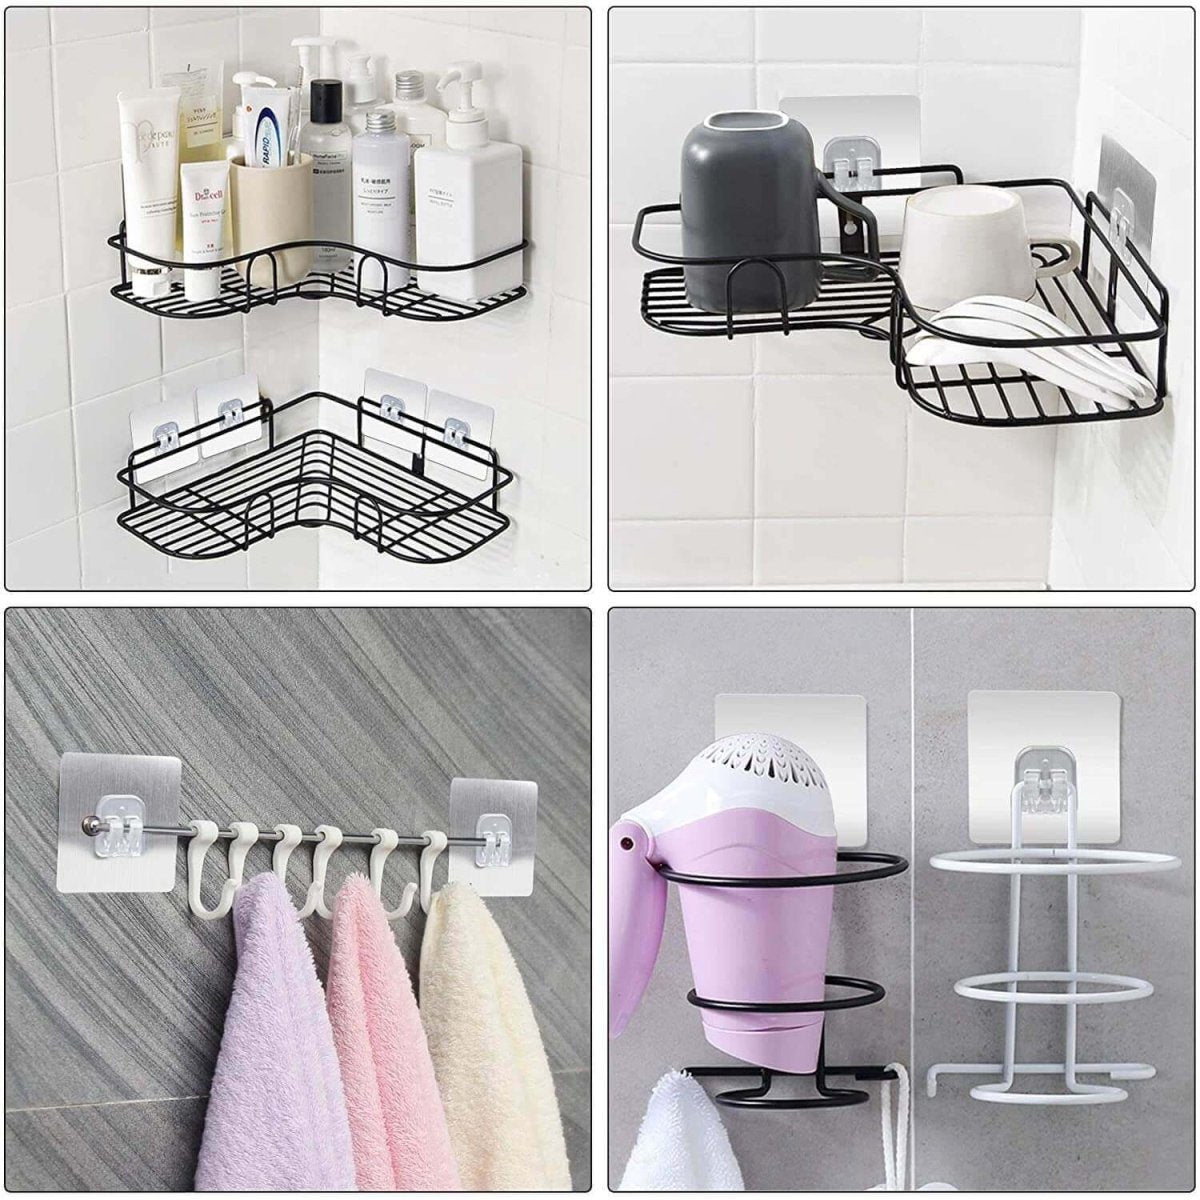 Adhesive Wall Hooks For Shower Caddy (1 Set) - PlanetShopper